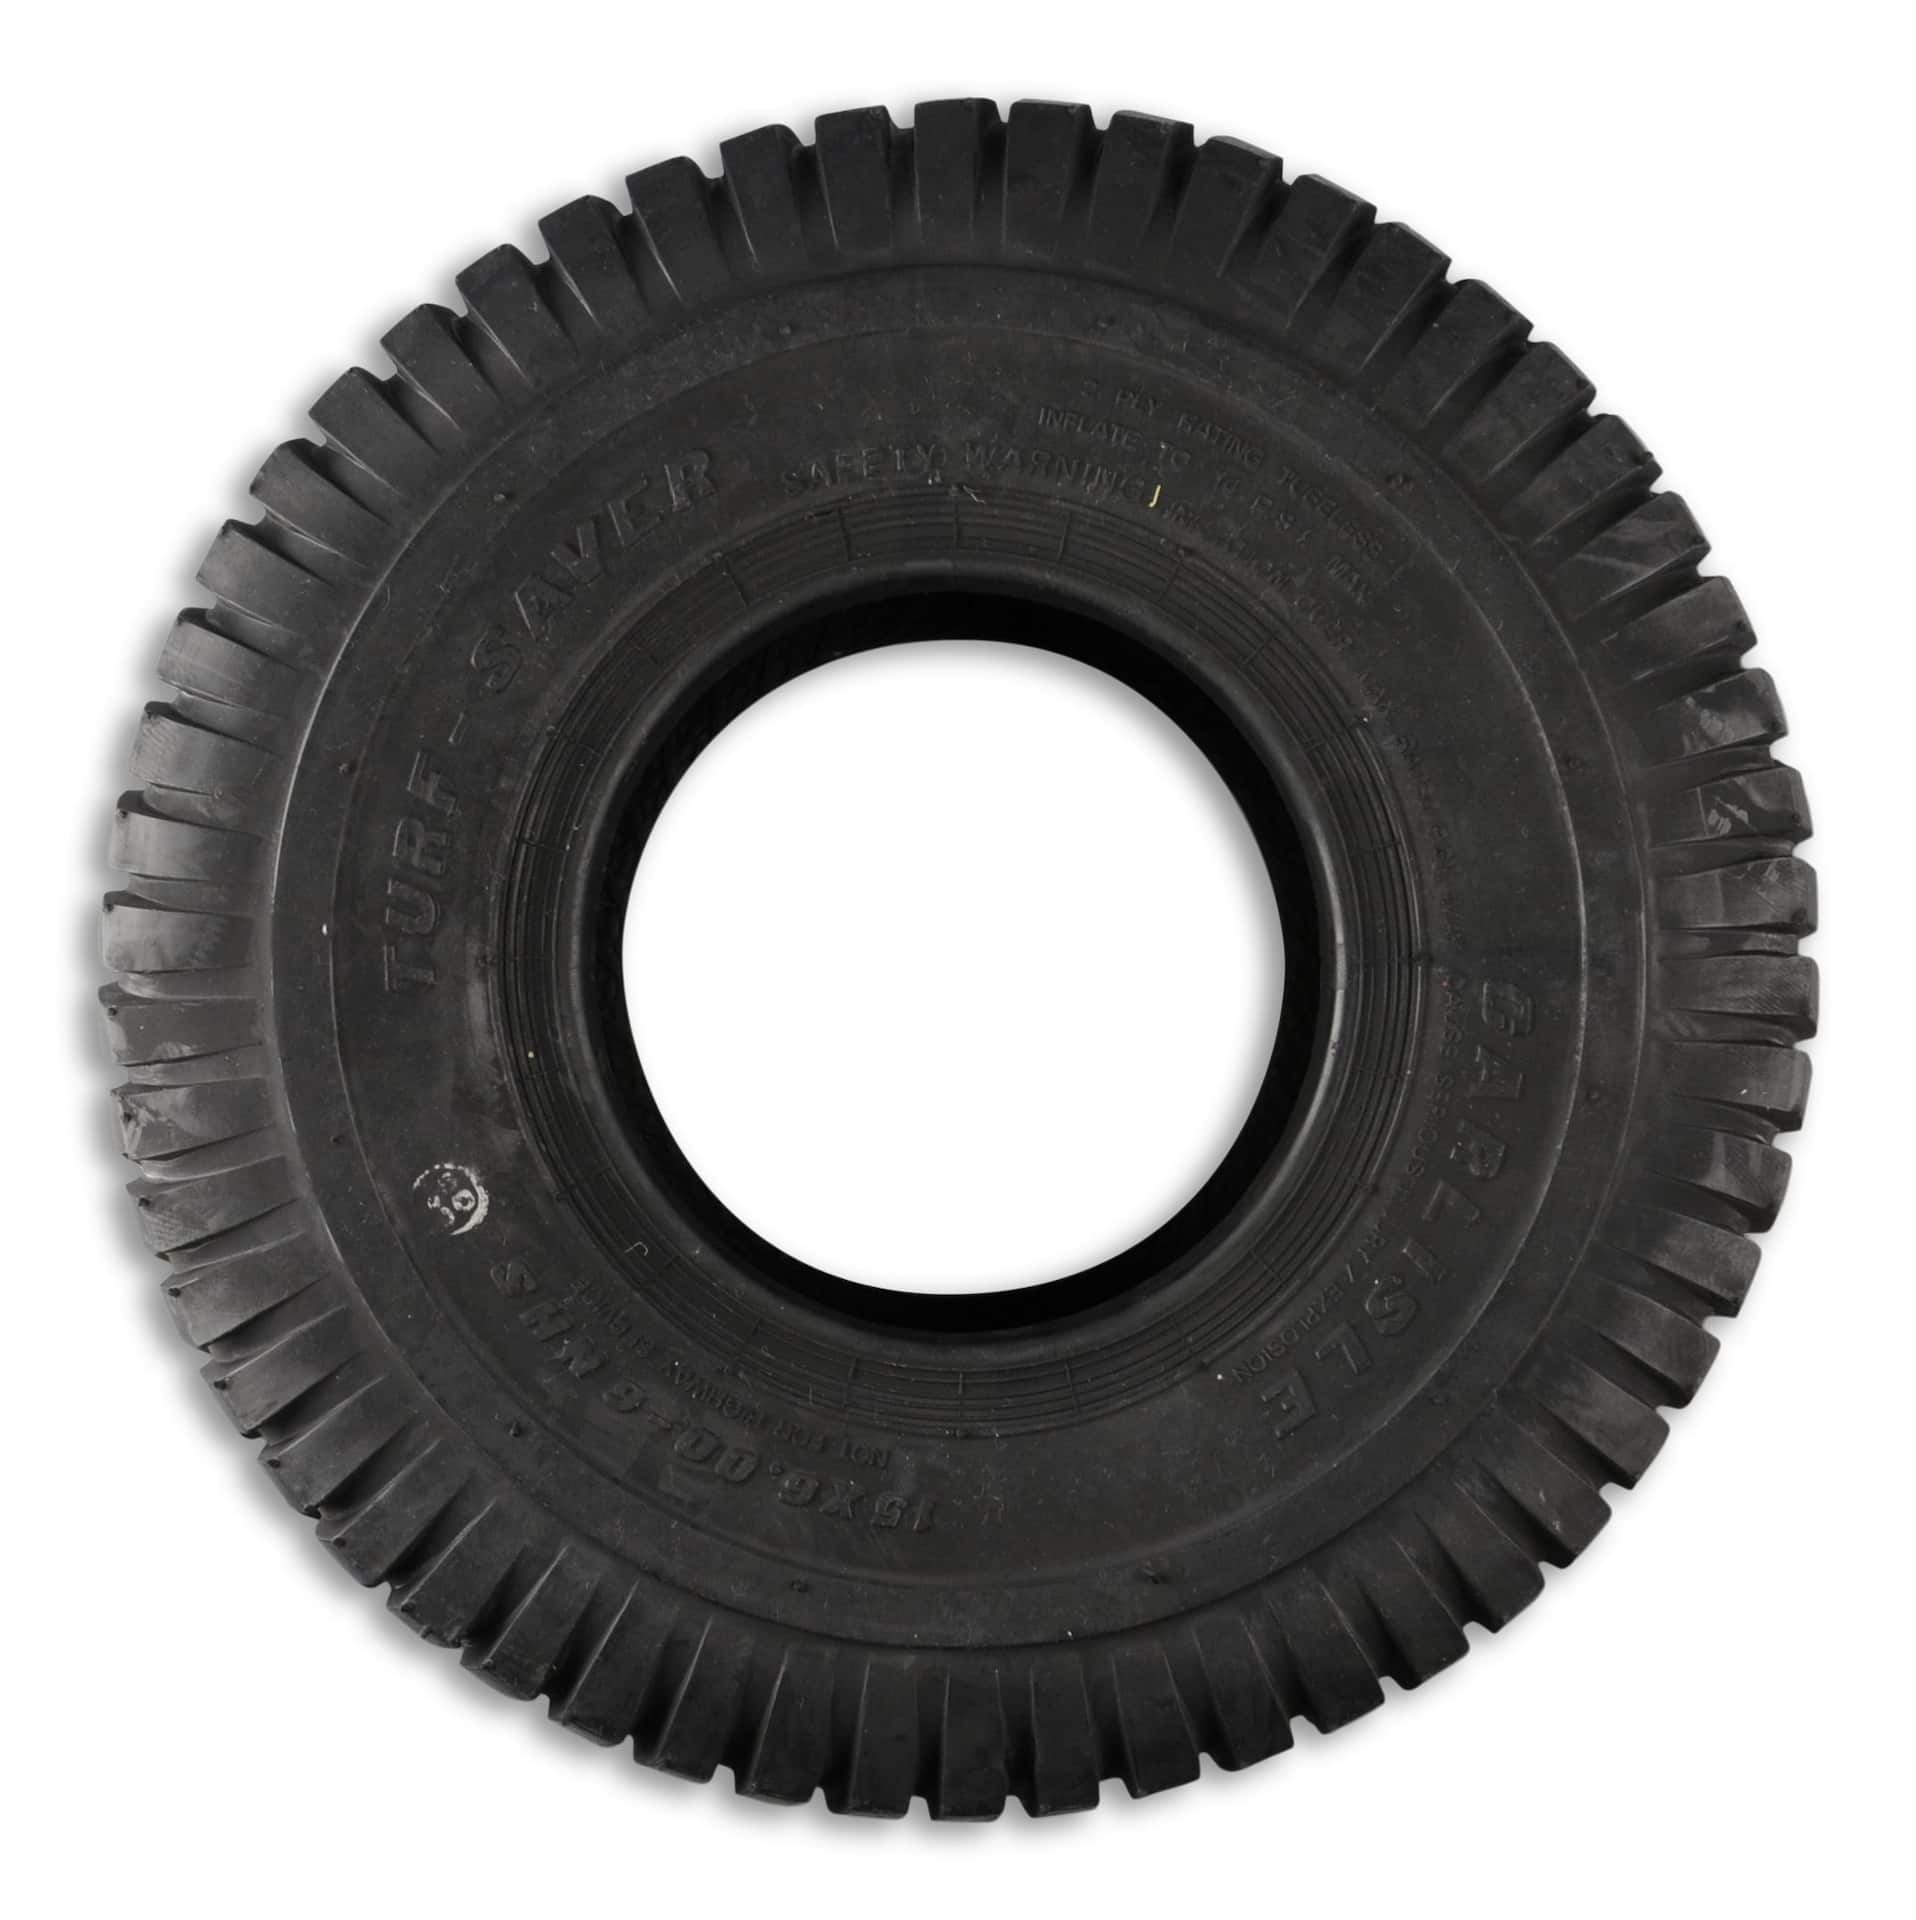 https://media-www.canadiantire.ca/product/seasonal-gardening/outdoor-tools/tractor-lawn-mower-snowthrower-parts/0607120/turfsave-15x6-tire-6-rim-8e49c8c8-4ea5-443c-961d-a95cb0e741eb-jpgrendition.jpg